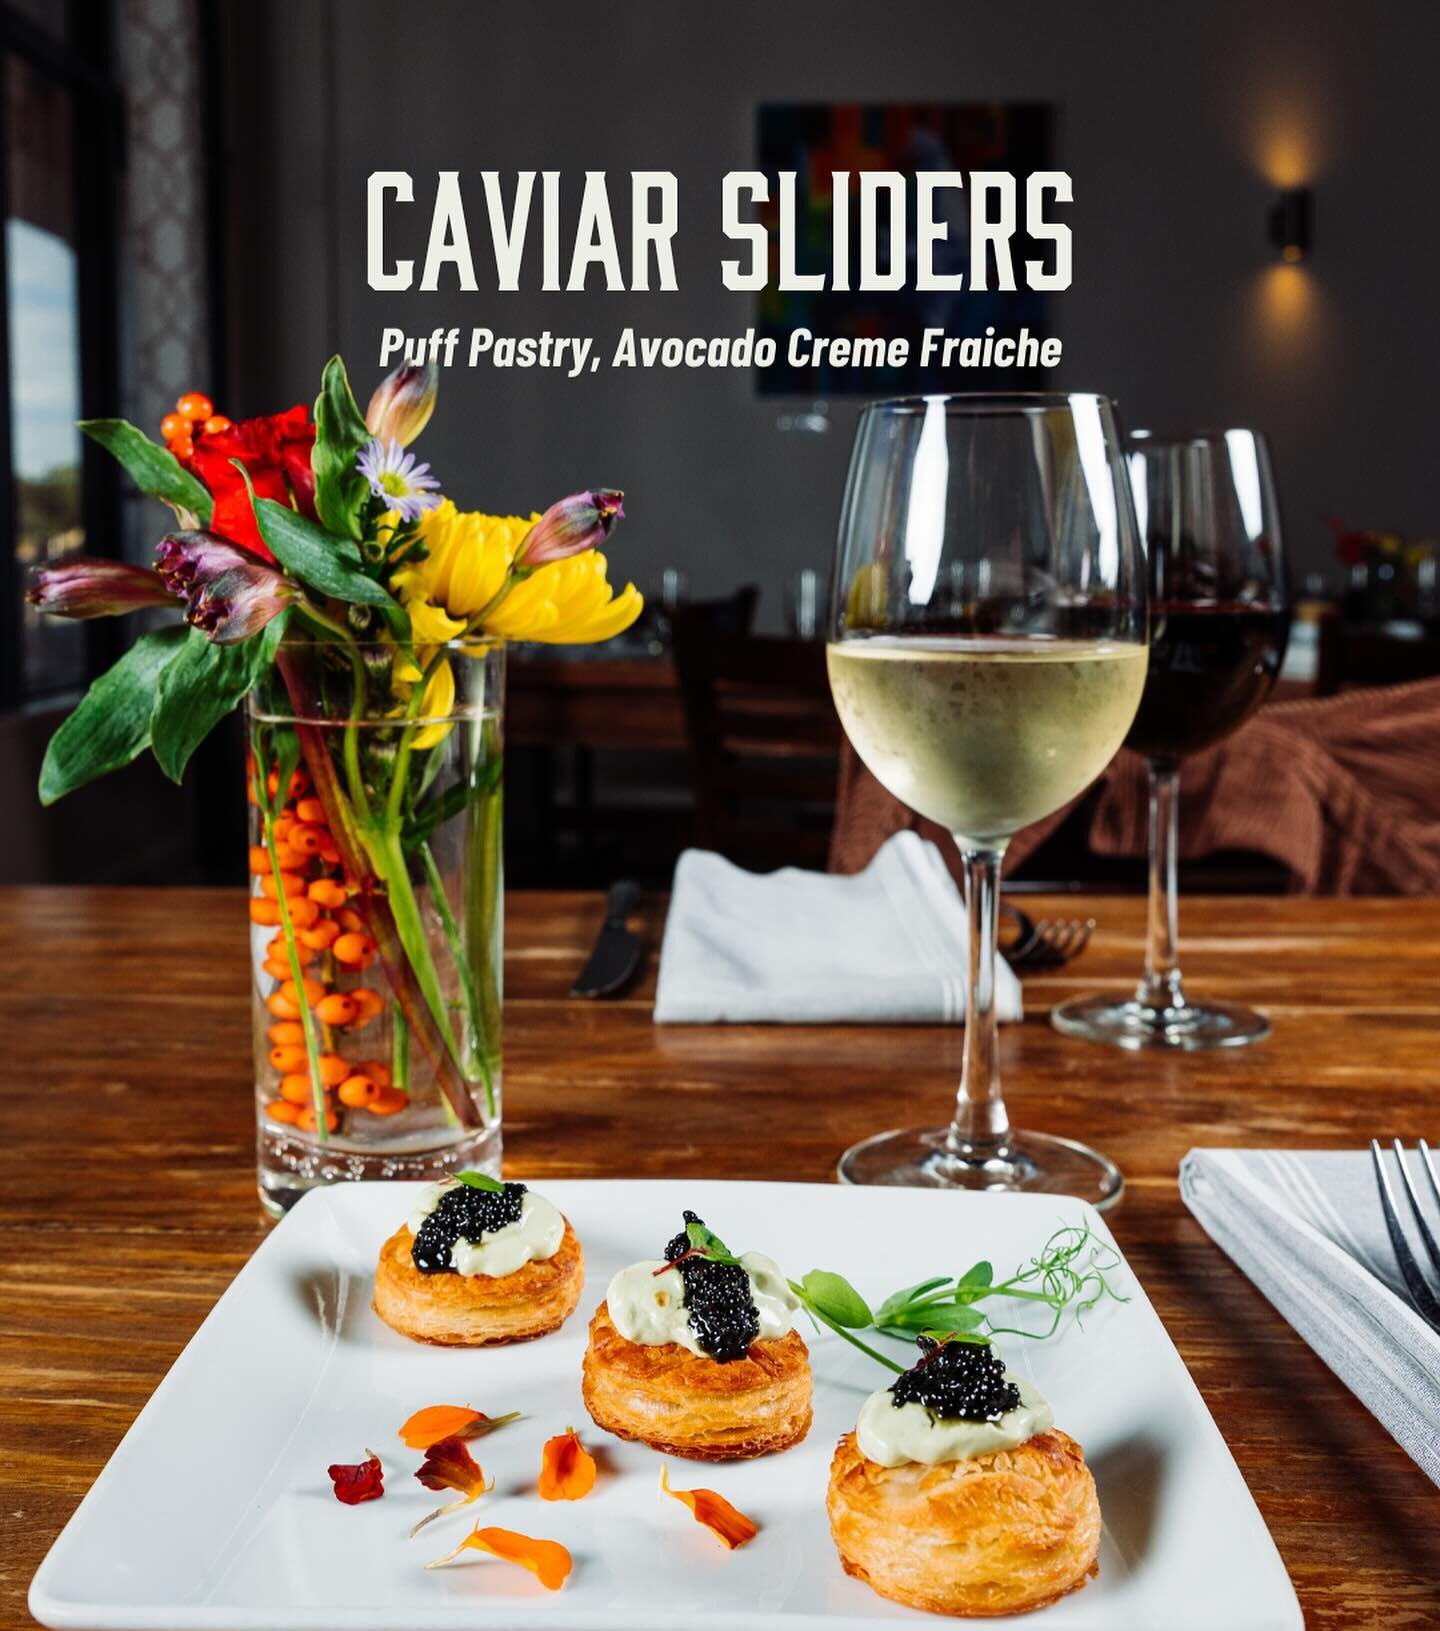 Caviar&rsquo;s in right? Start your visit off with a bite of luxury.

#wearetrueblue #wilmingtonnc #wrightsvillebeach #wilmingtonfoodie #caviarsliders